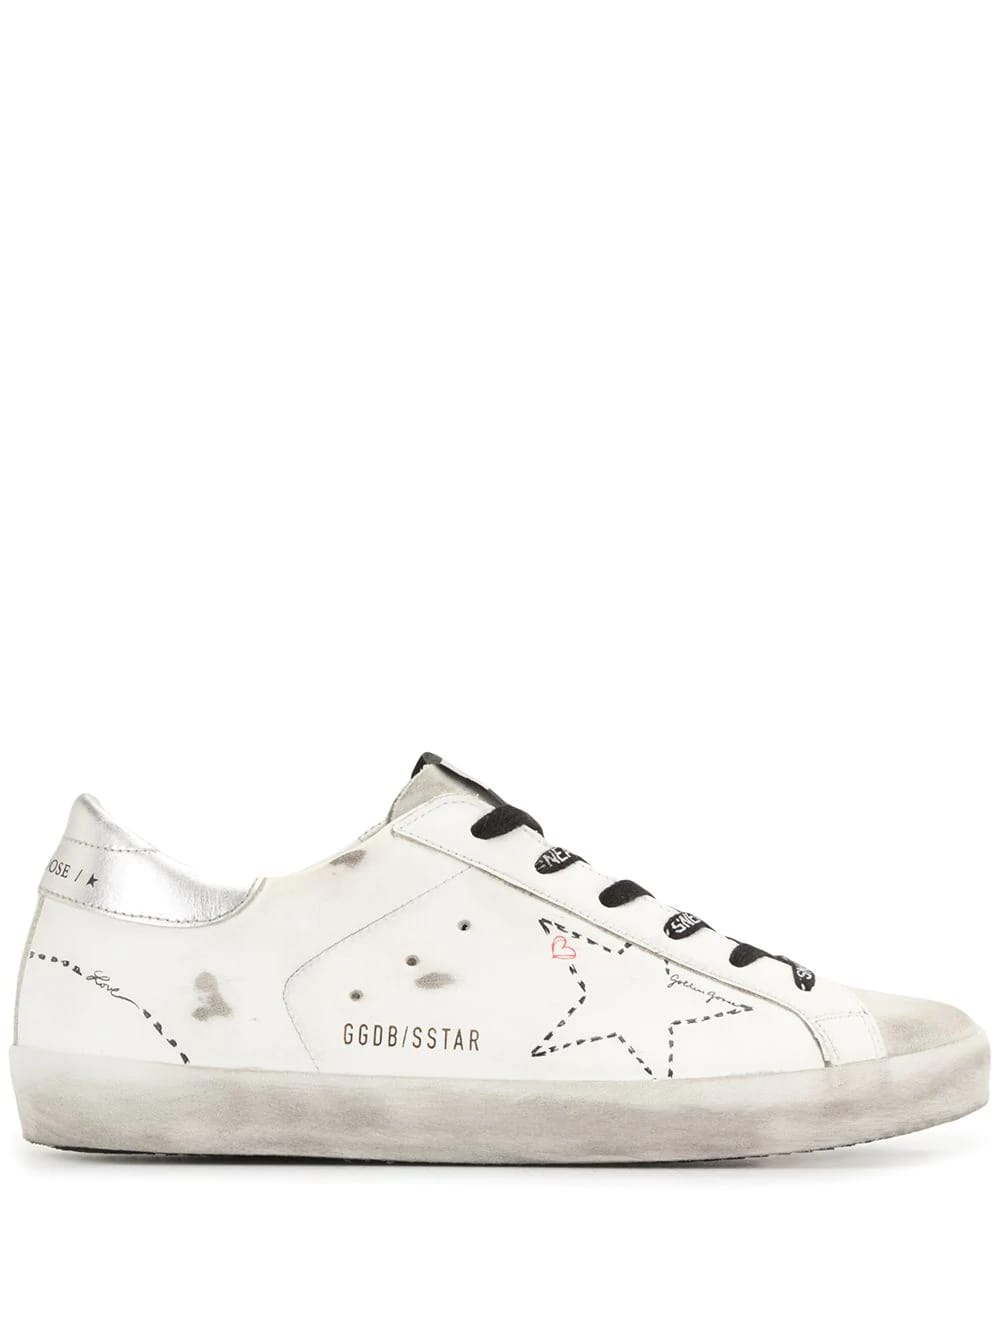 Golden Goose Woman White Super-star Sneakers With Contrast Stitched Star